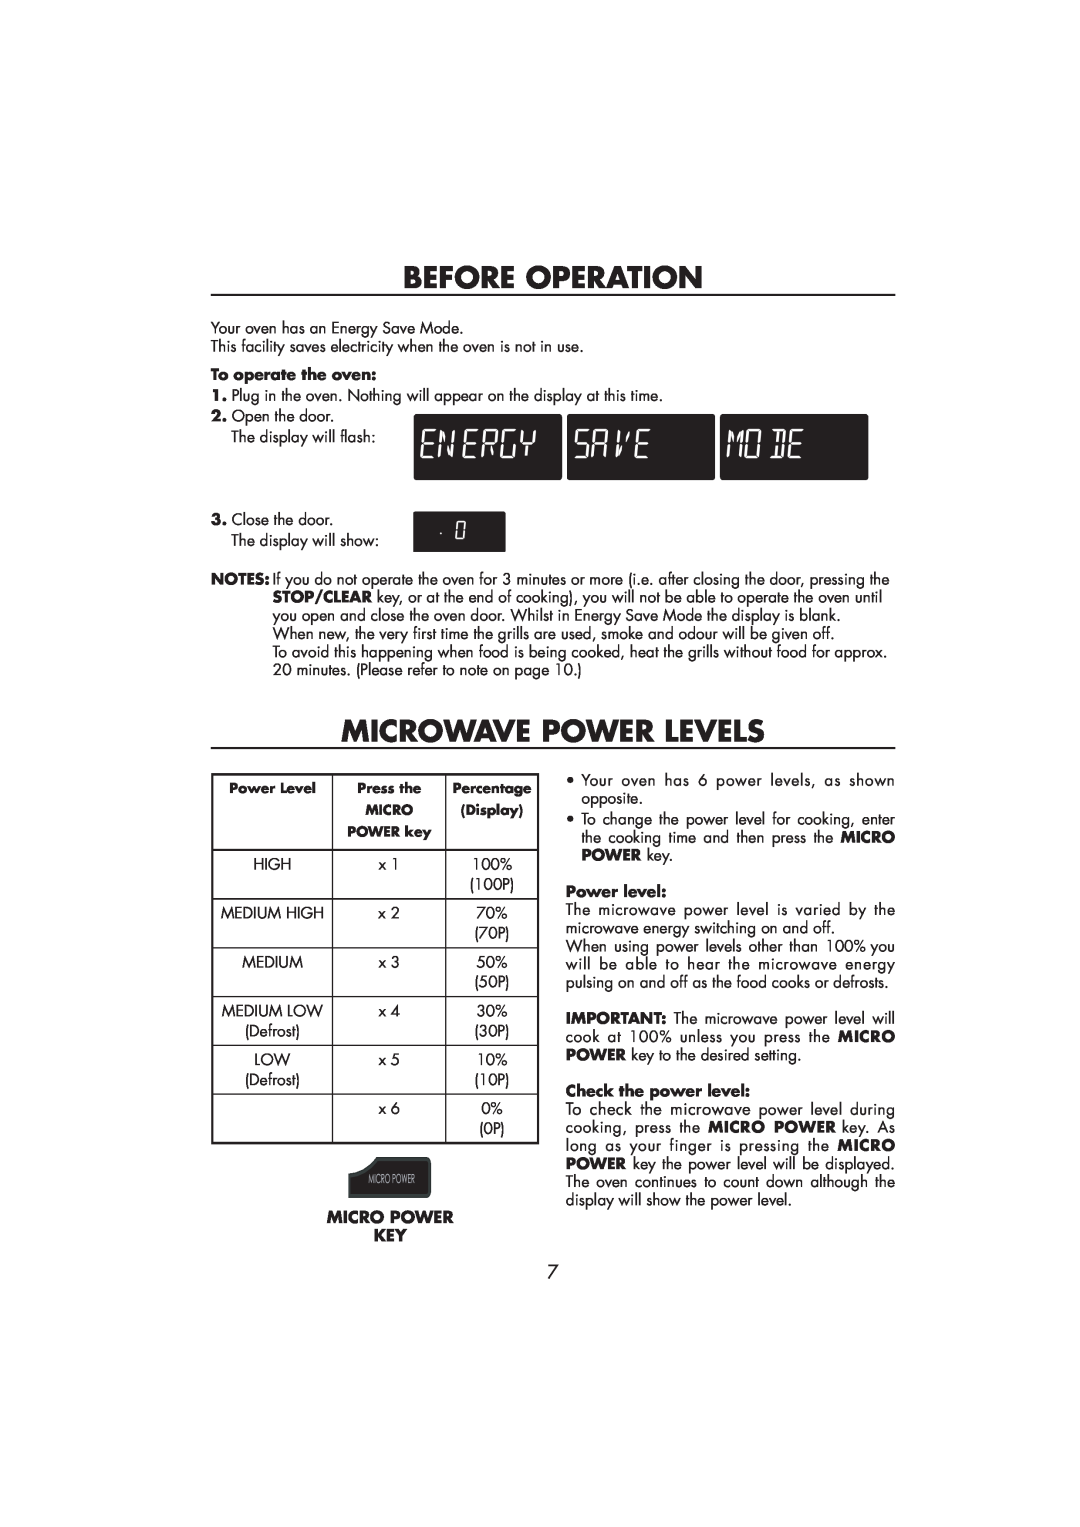 Sharp R-890SLM operation manual Before Operation, Microwave Power Levels, Micro Power Key, To operate the oven, Power level 